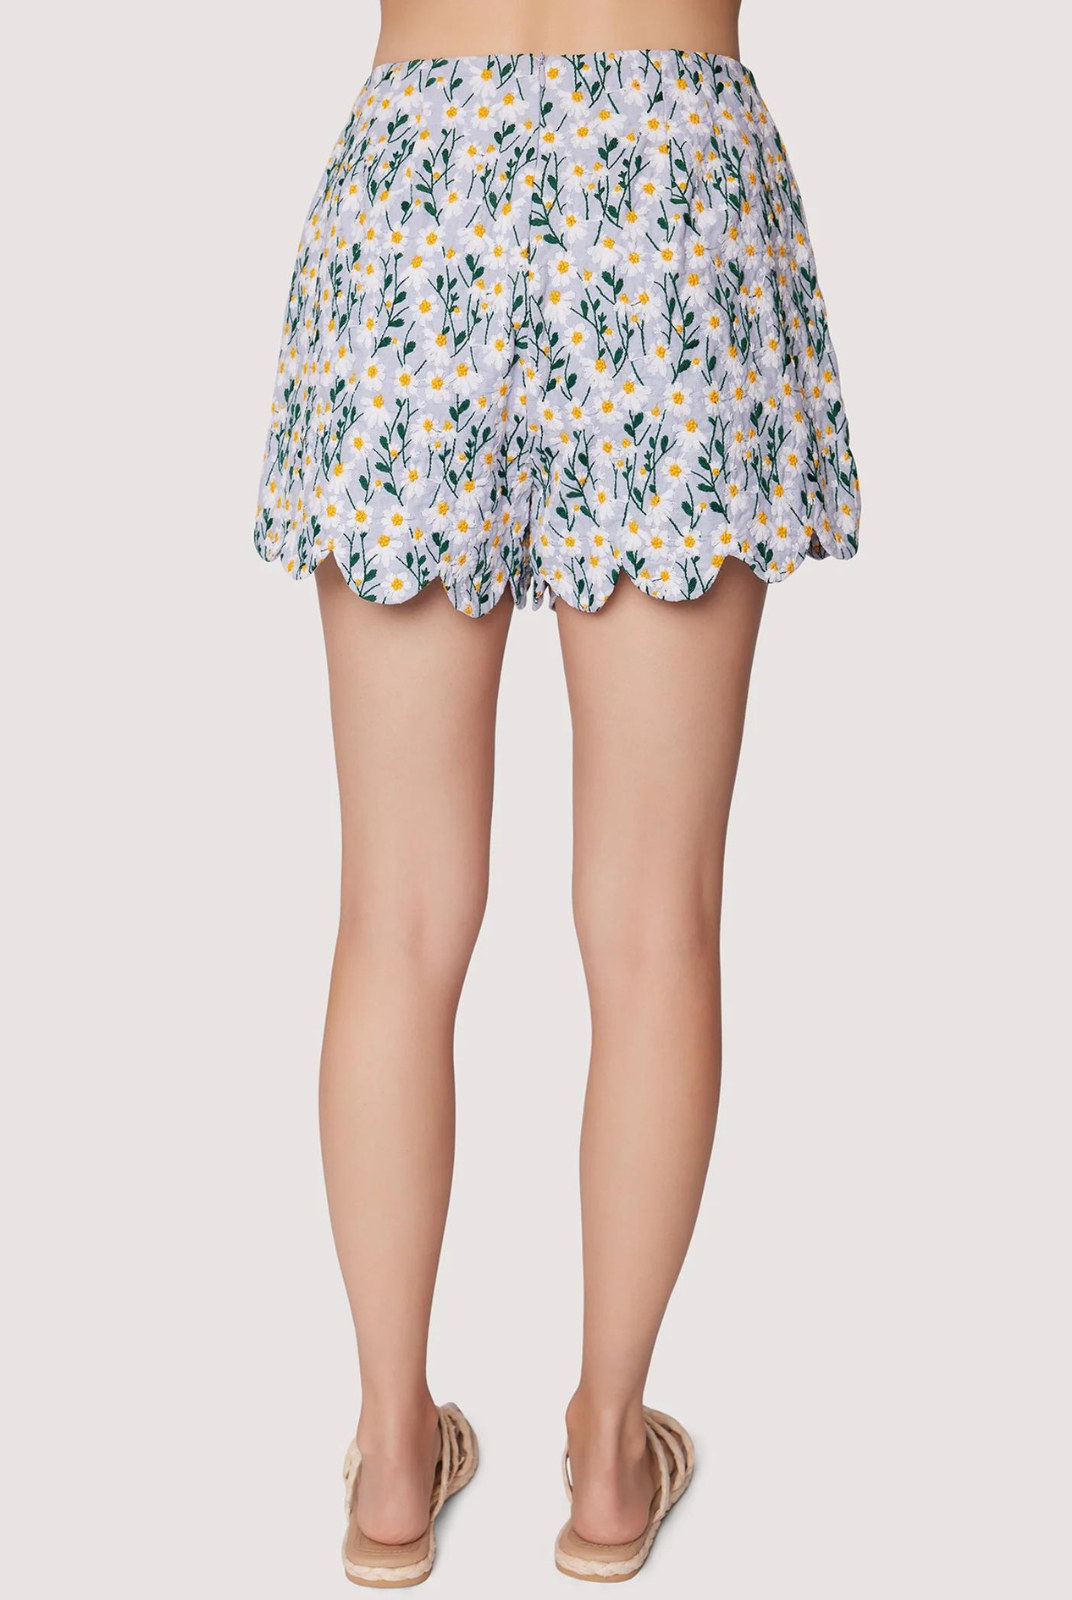 Lost + Wander Breath Of Youth Scallop Shorts. Introducing the Breath Of Youth Scallop Shorts, These floral embroidered shorts feature a delicate scallop detail and convenient side pockets. Made with a lightweight cotton blend fabric, these shorts are the perfect addition to your spring wardrobe.